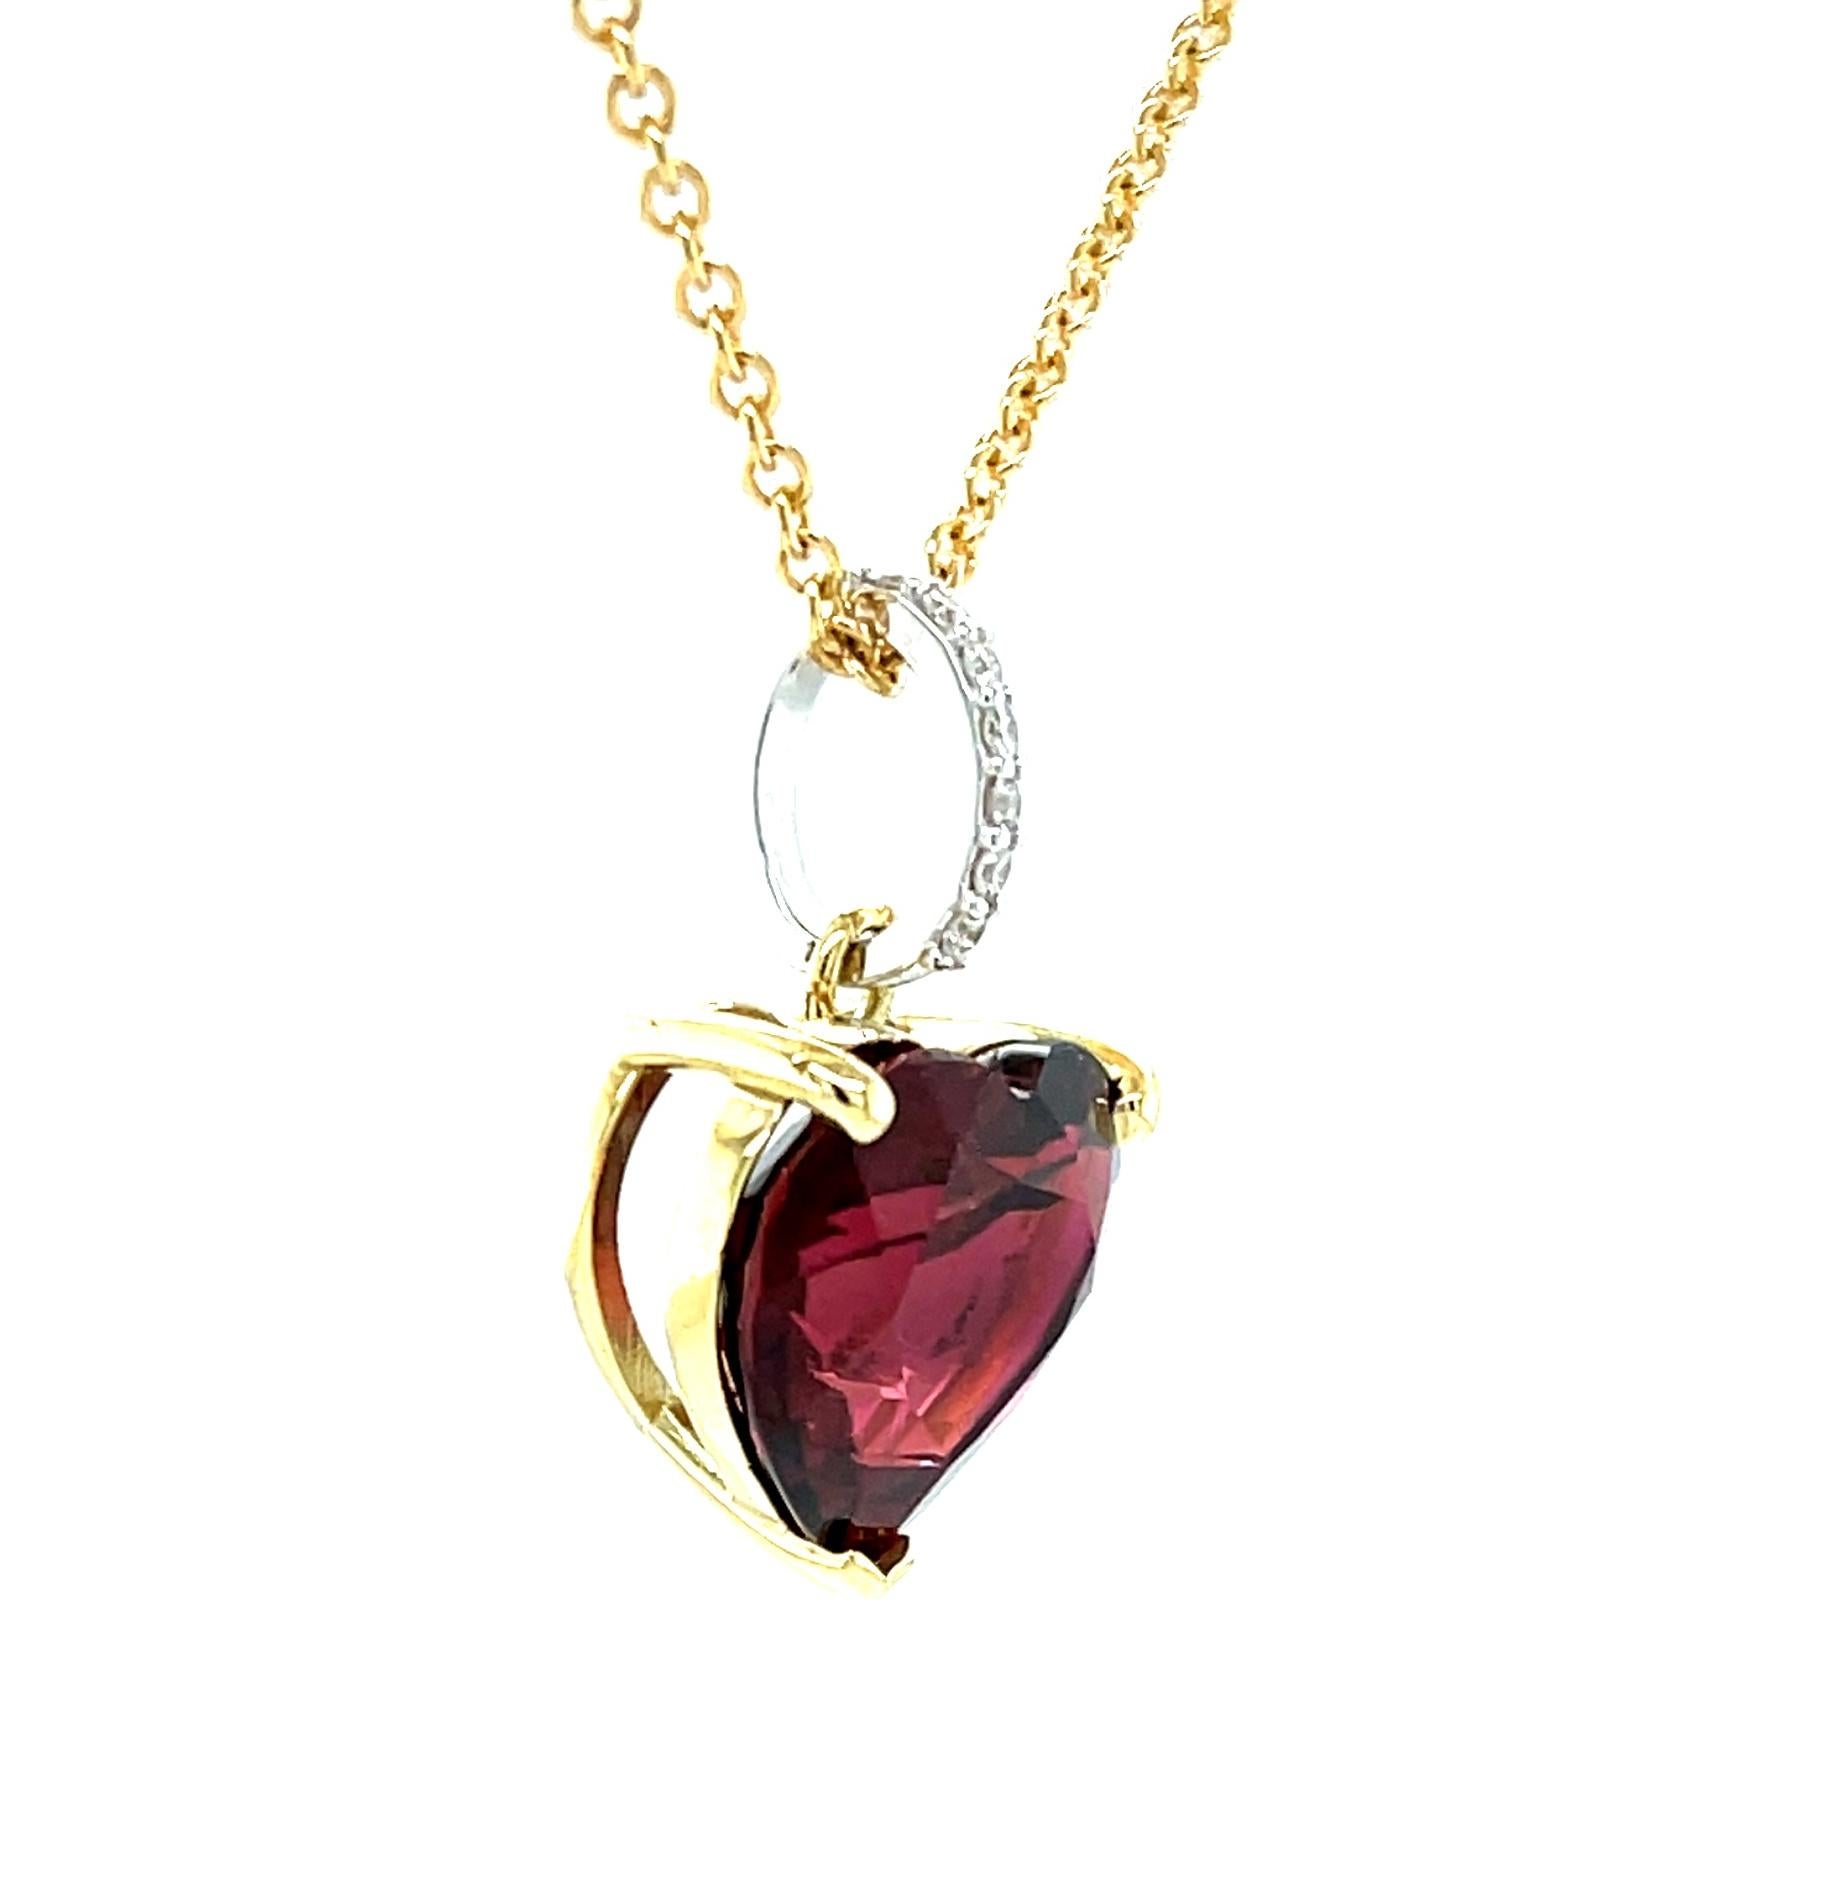 This impressive rubellite and diamond necklace features a beautiful 9.28 carat heart-shaped red tourmaline set in a handcrafted 18k yellow gold basket and a sparkling diamond-set bail! The large rubellite is a perfectly proportioned heart-shape with